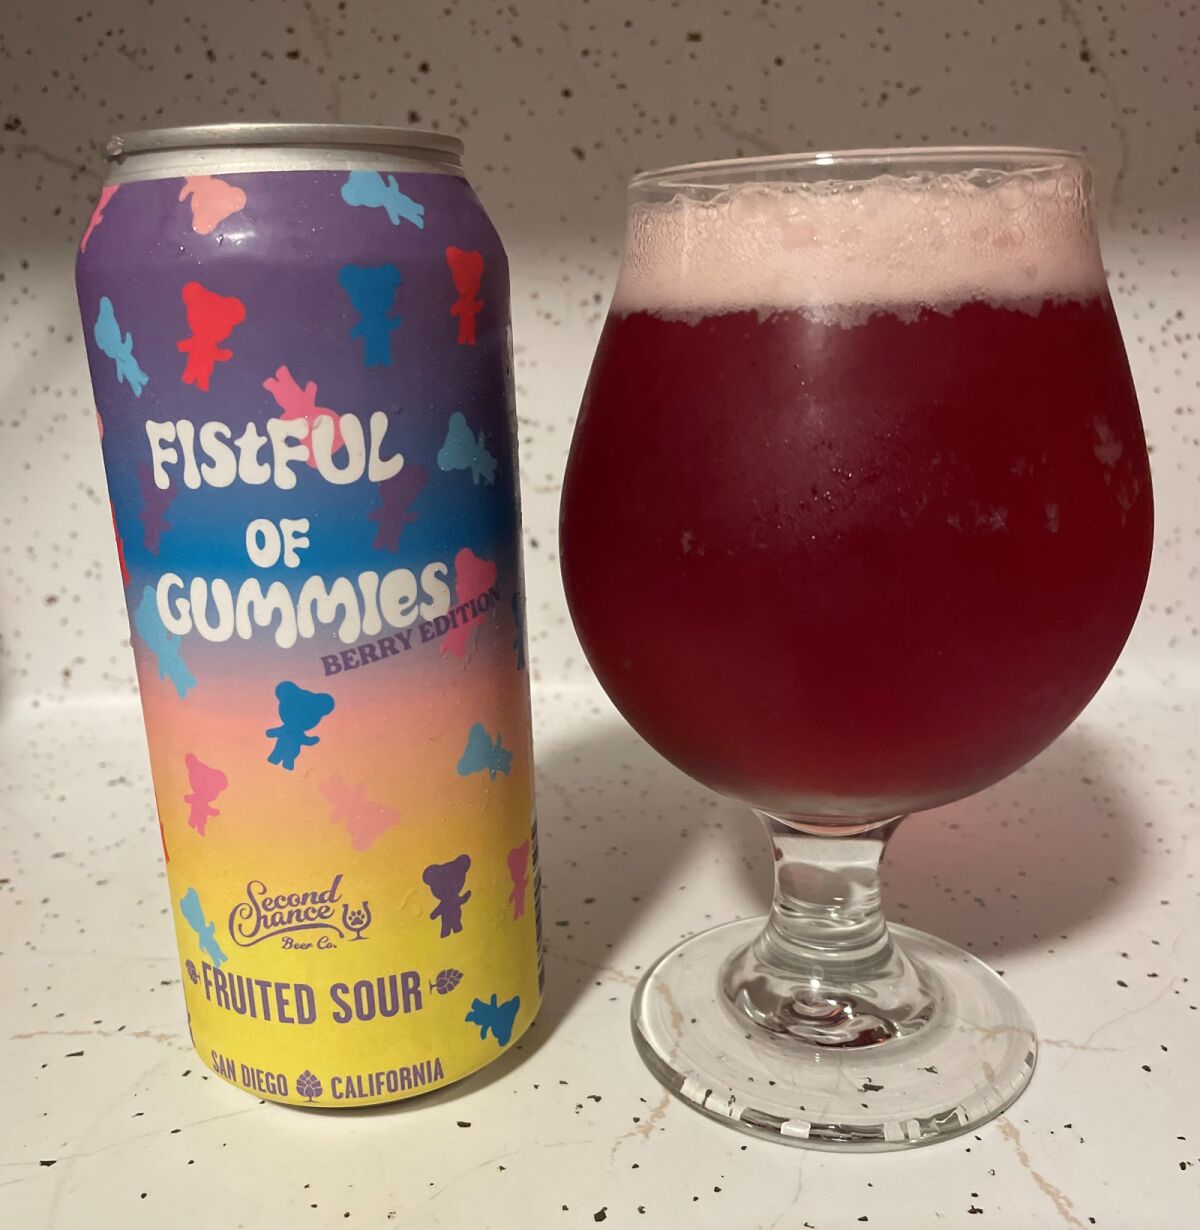 Second Chance Beer's Fistful of Gummies, Berry Edition.